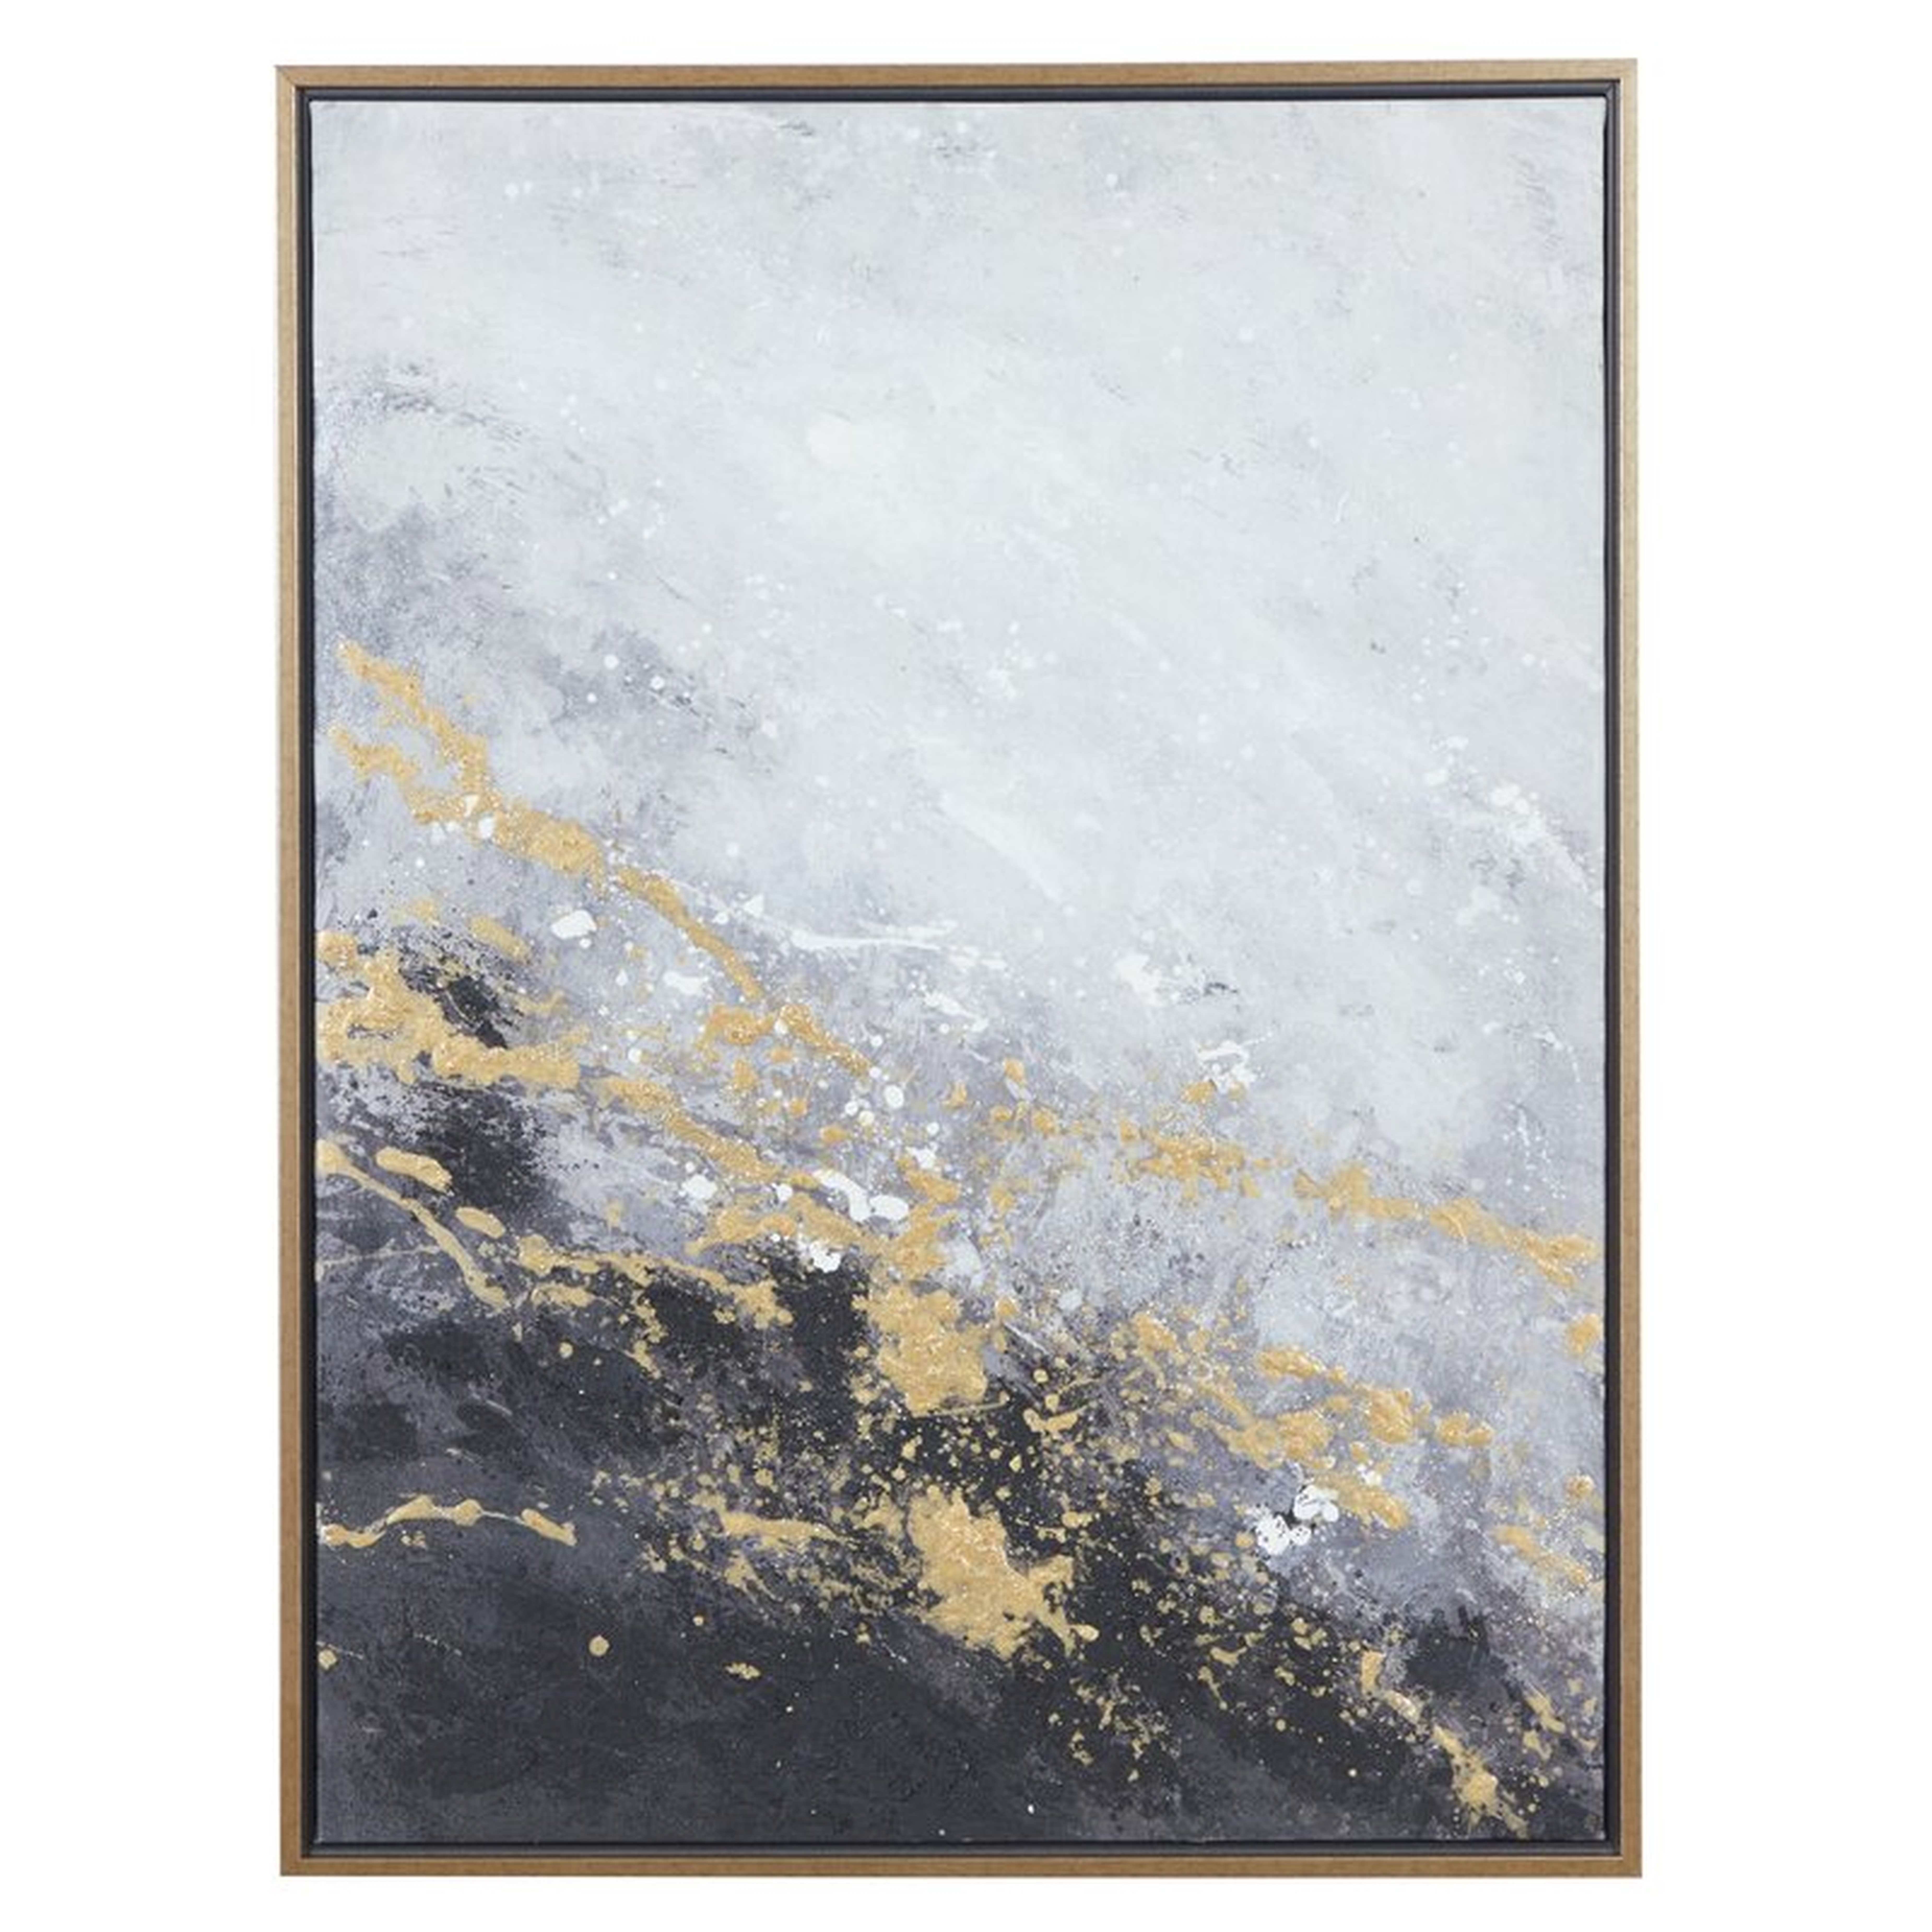 Rectangular Dark Gray & Gold Foil Abstract Corner Wall Art-Picture Frame Painting on Canvas, 30" x 40" - Wayfair